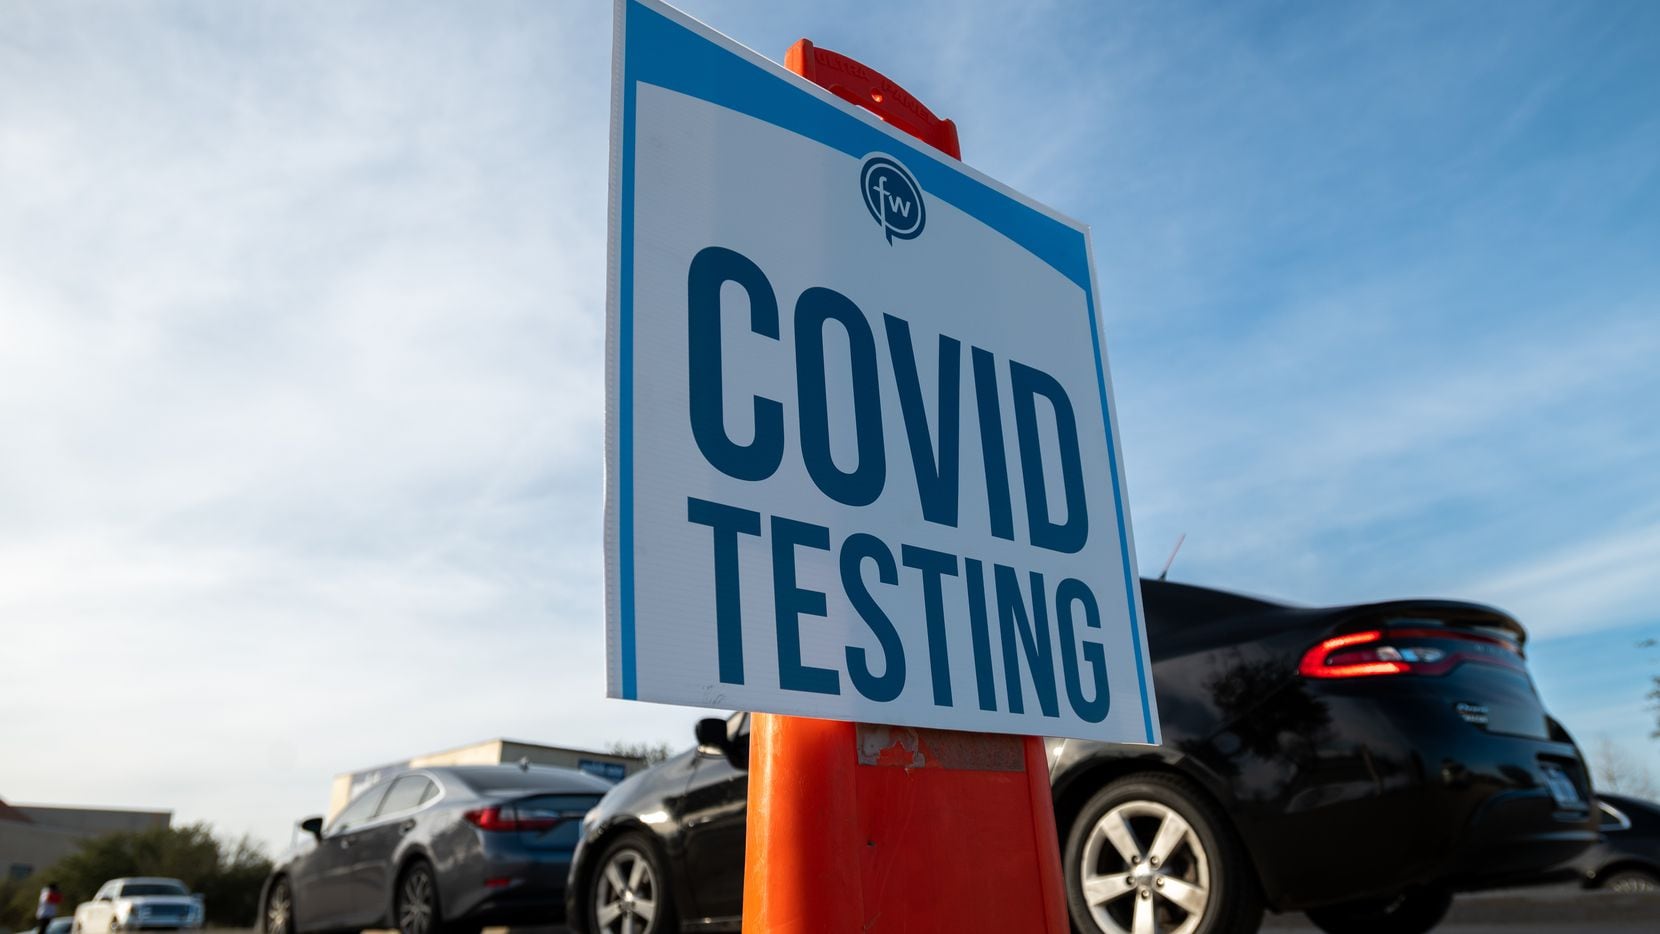 Signage is on display as motorists wait for a COVID-19 test in the parking lot of Friendship-West Baptist Church in south Dallas, on Jan. 6, 2022. The testing site is partnering with Zoom Medical Testing and Sunshine Labs to host the free rapid testing site.